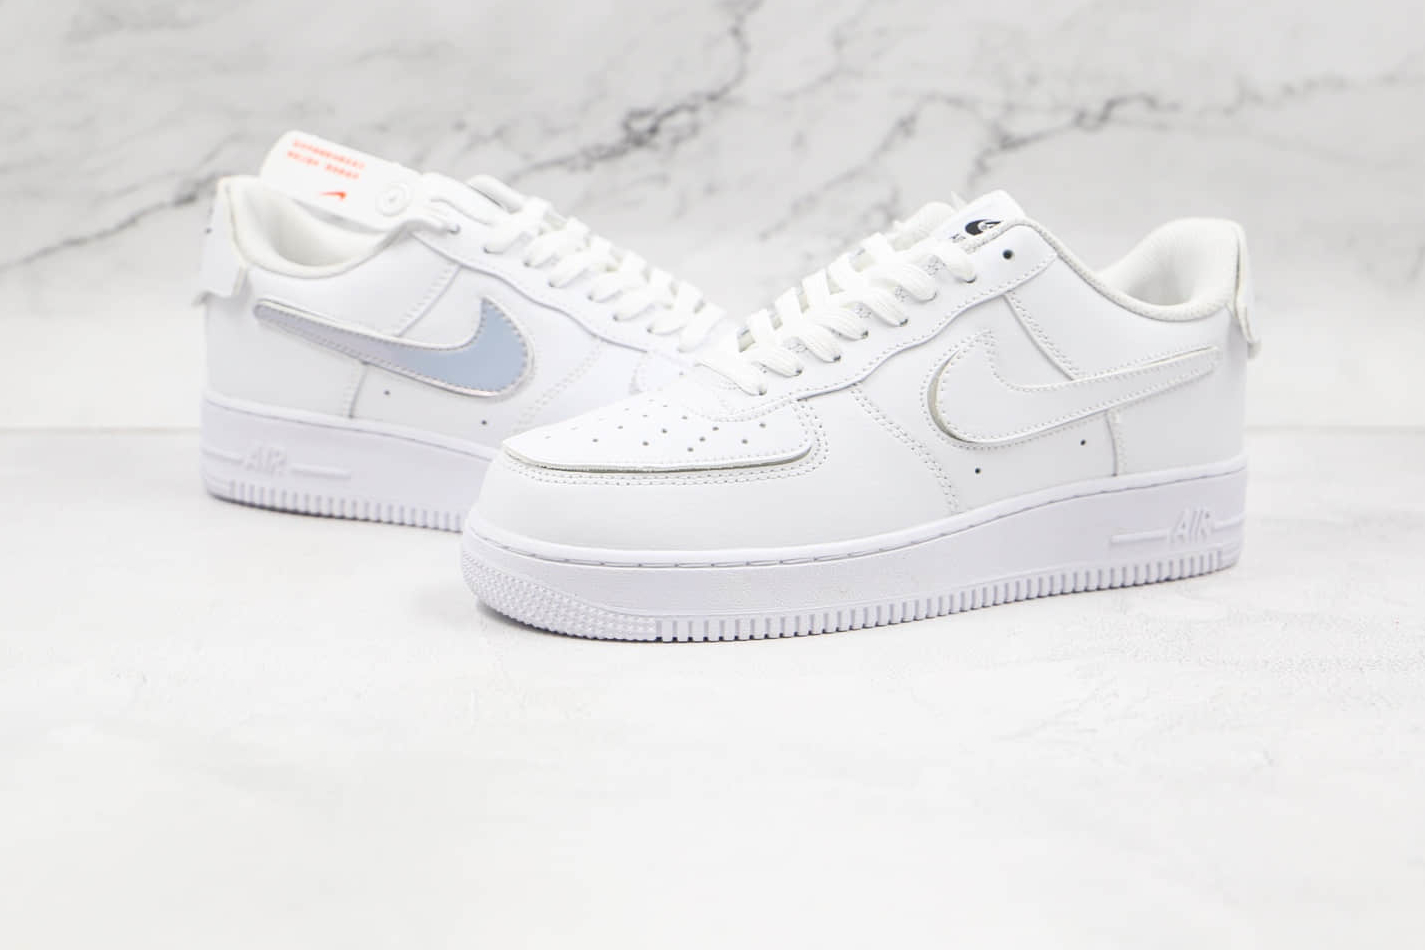 Nike Air Force 1 'White' DB2812-100 - Classic Style & Supreme Comfort